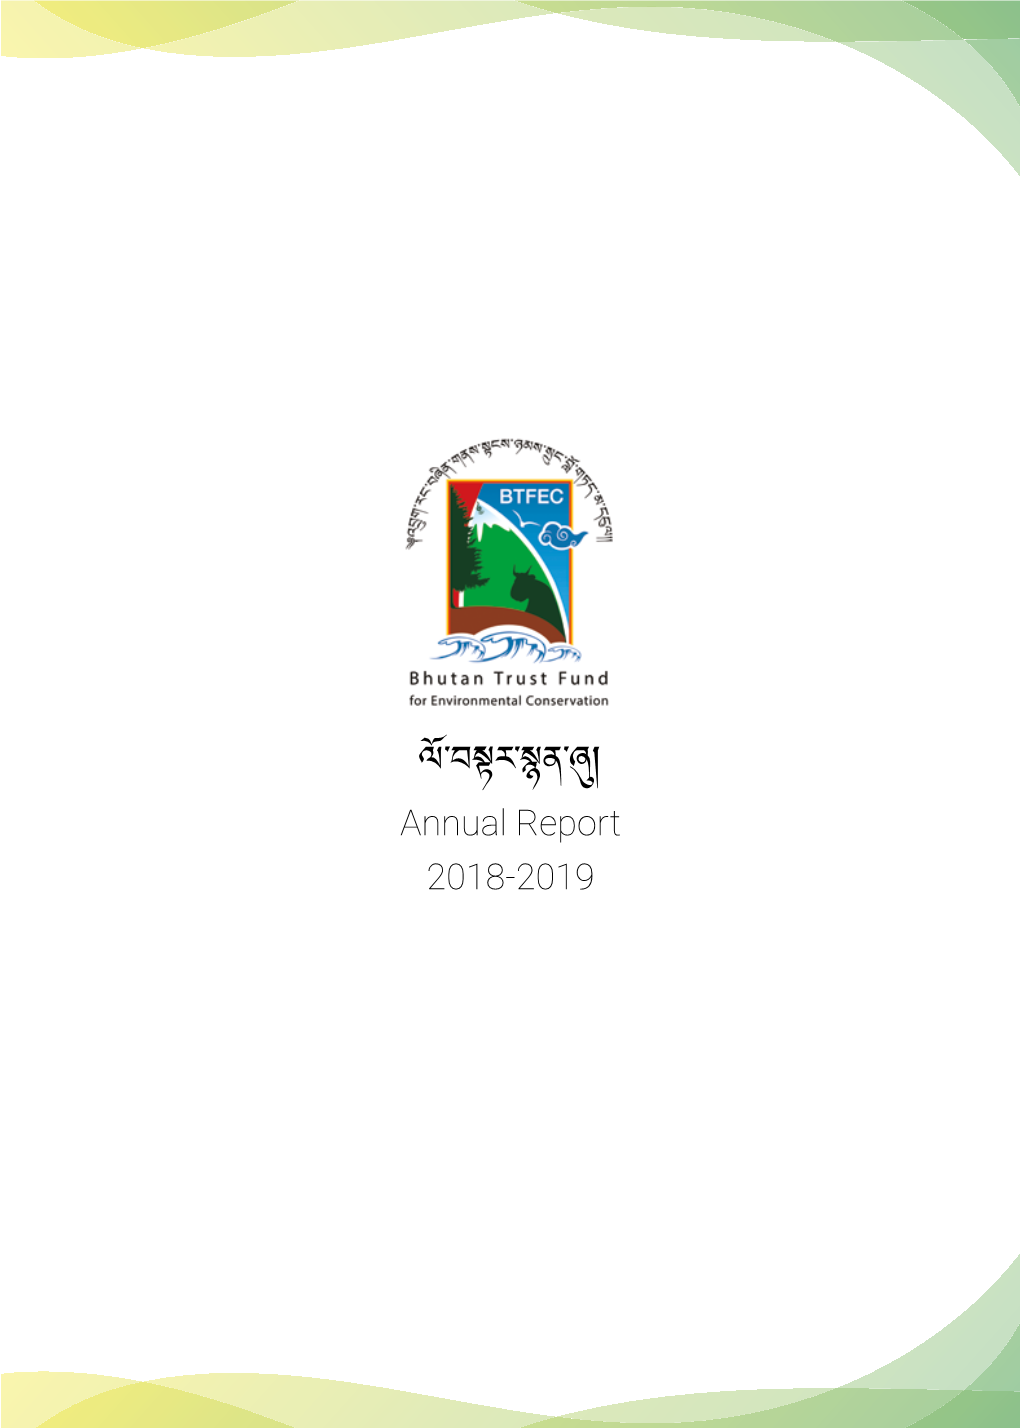 Annual Report 2018-2019 Bhutan Trust Fund for Environmental Conservation